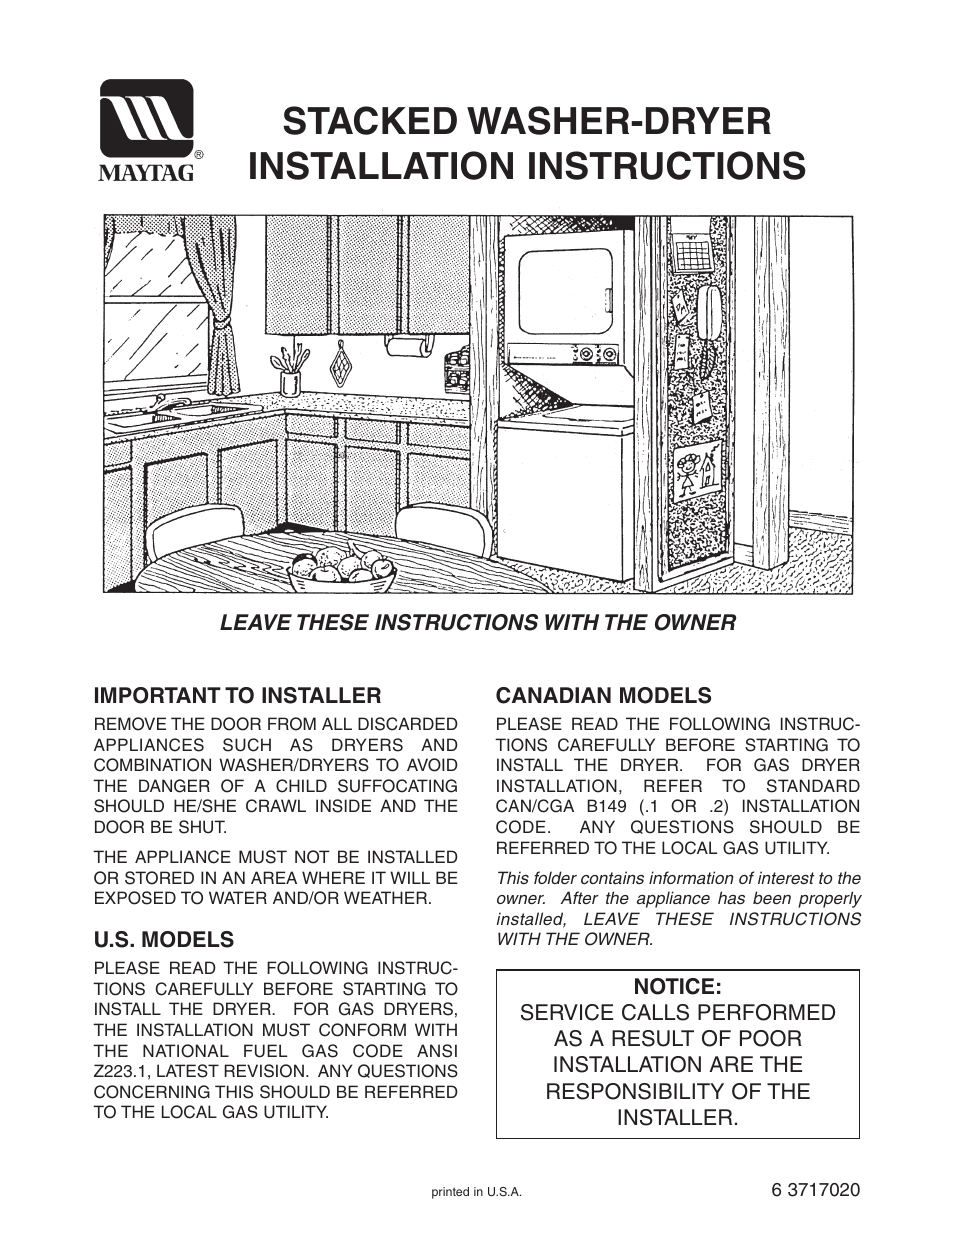 Maytag Stacked Washer/Dryer User Manual | 14 pages